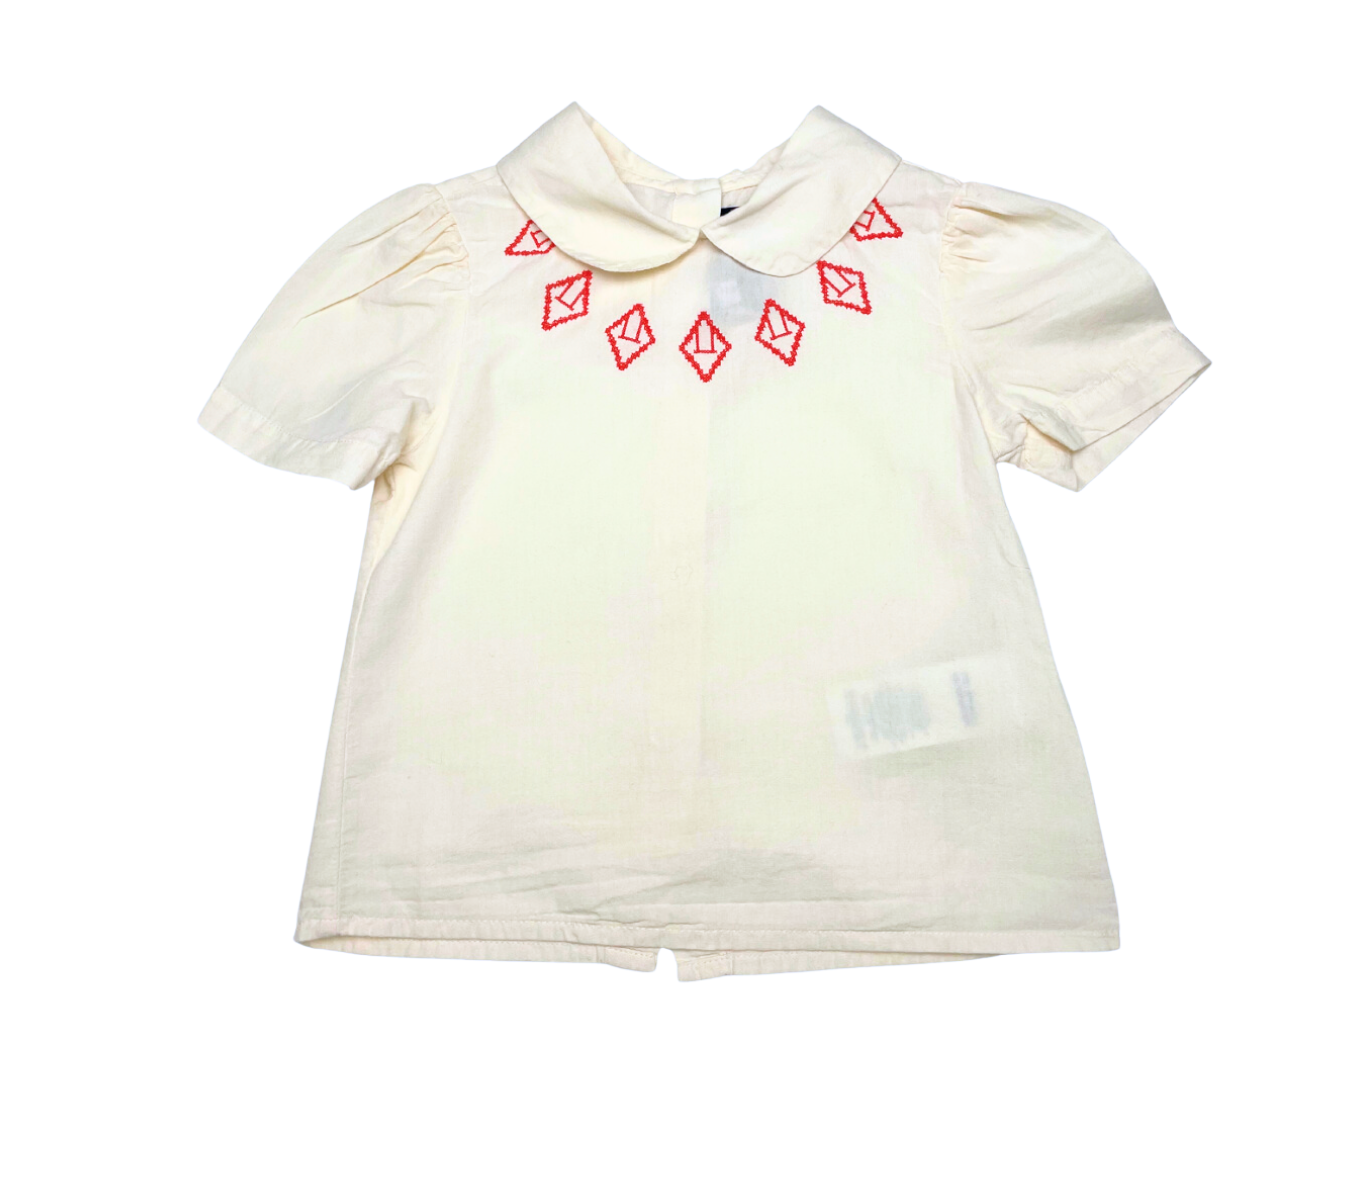 THE ANIMALS OBSERVATORY - Blouse blanche avec broderie - 2 ans